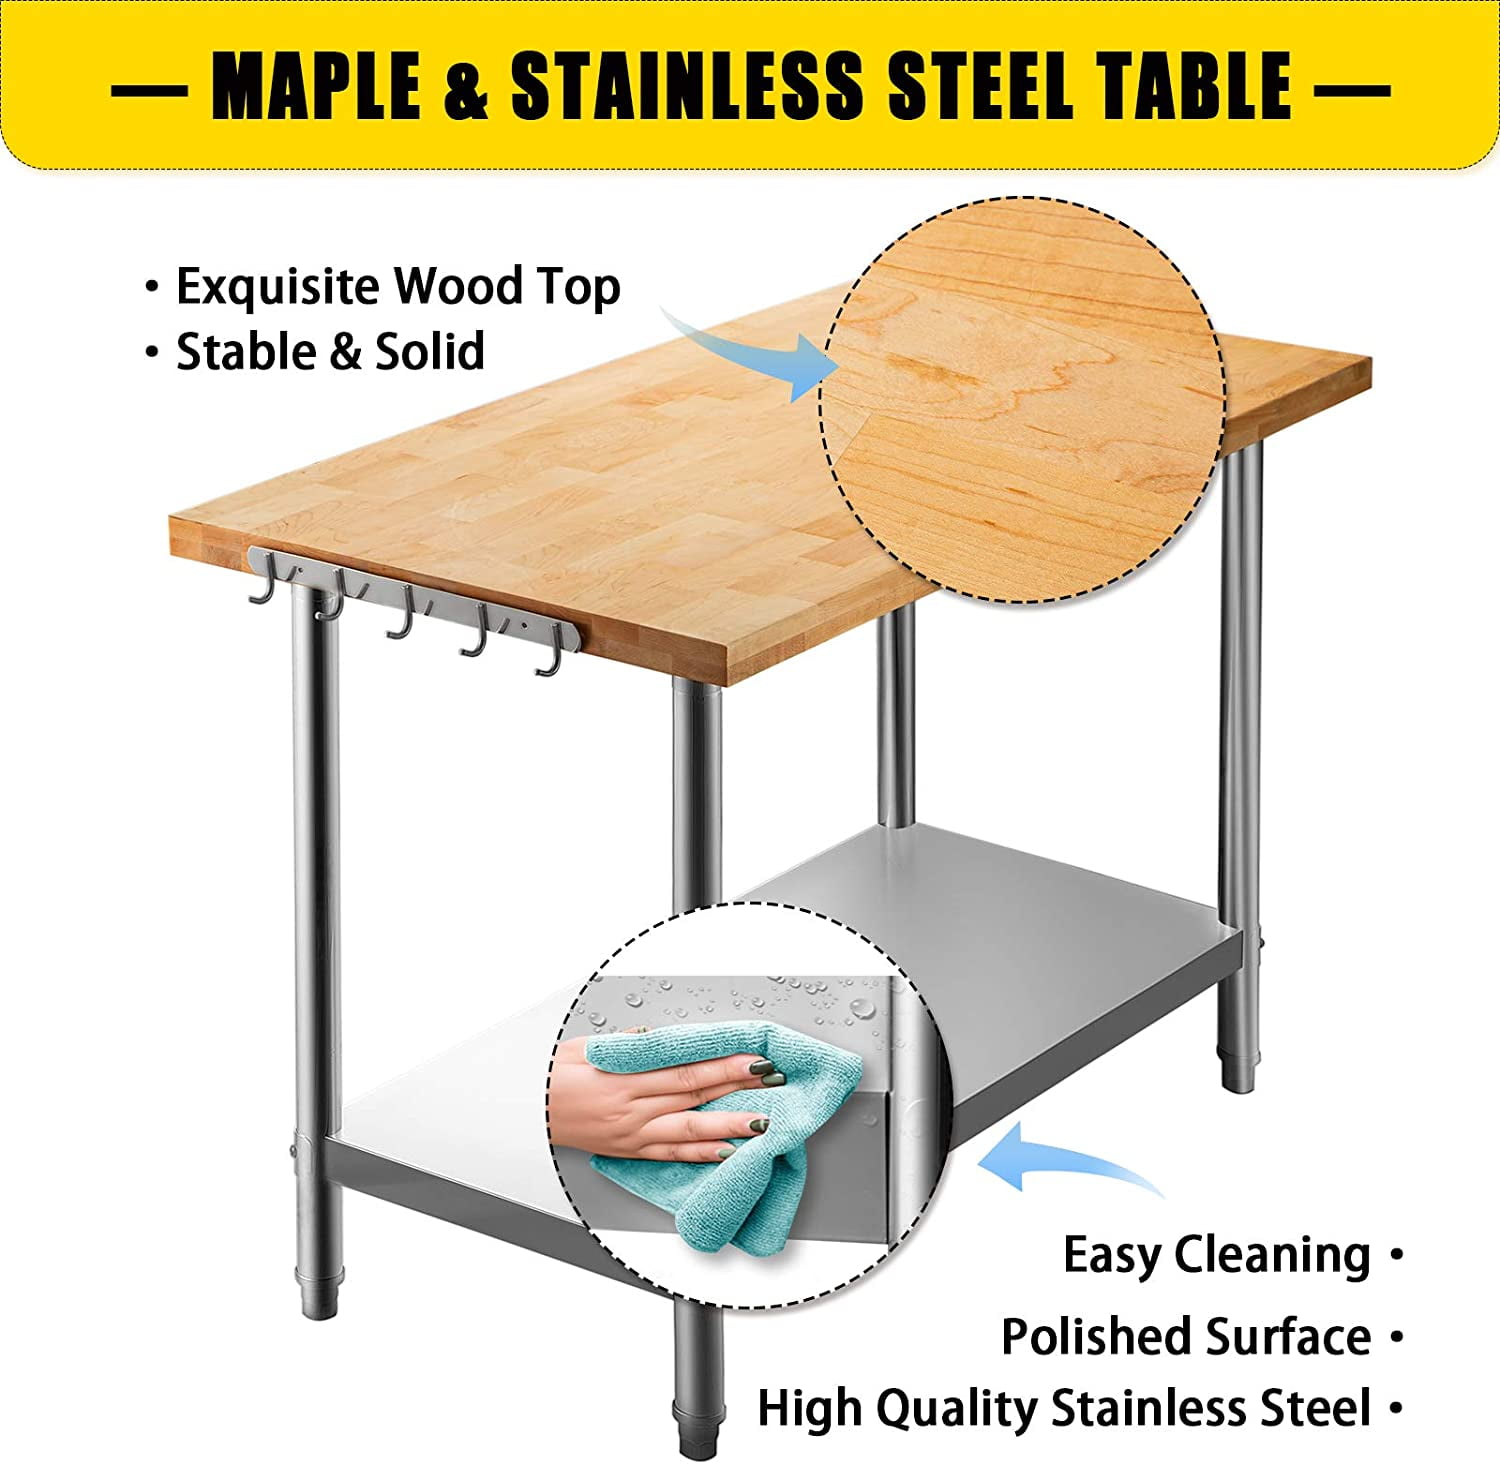 1.5 Inch Thick Kitchen Maple Table with Lower Shelf and Feet Stainless Steel Table for Home and Kitchen VEVOR Maple Top Work Table 48 x 24 Inches Stainless Steel Kitchen Prep Table Wood 